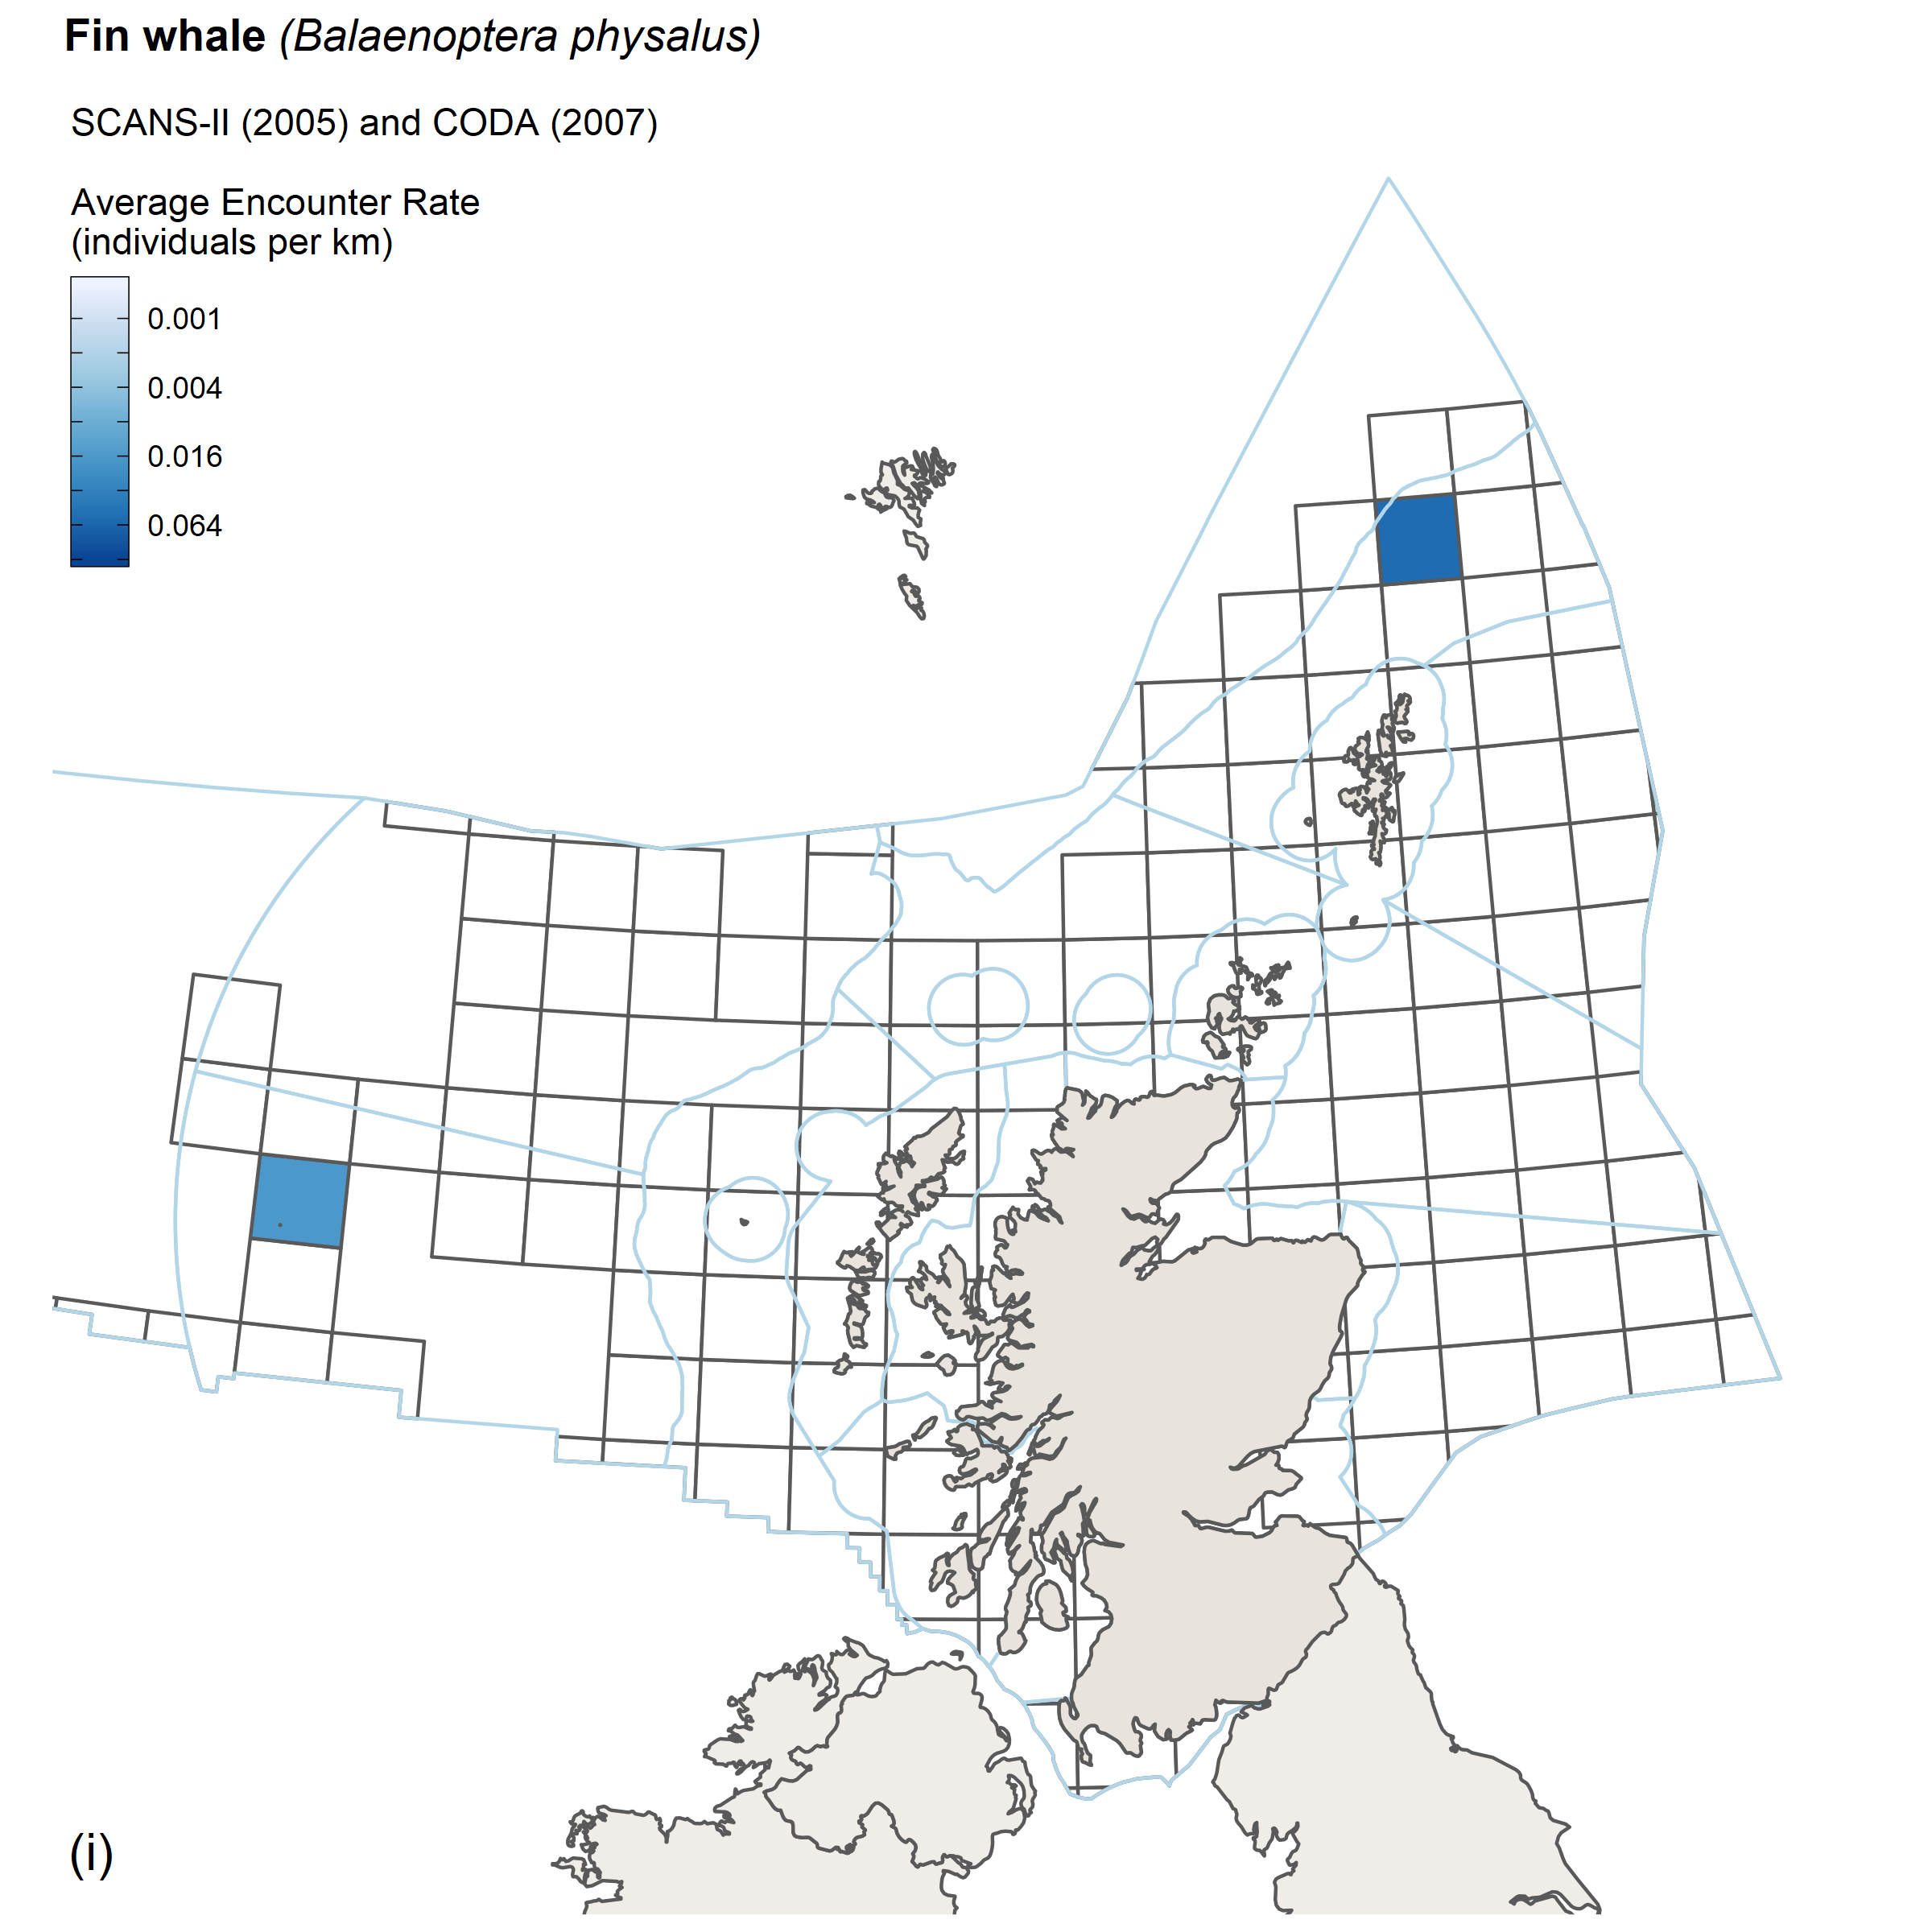 Encounter rates for fin whale from SCANS II/CODA survey